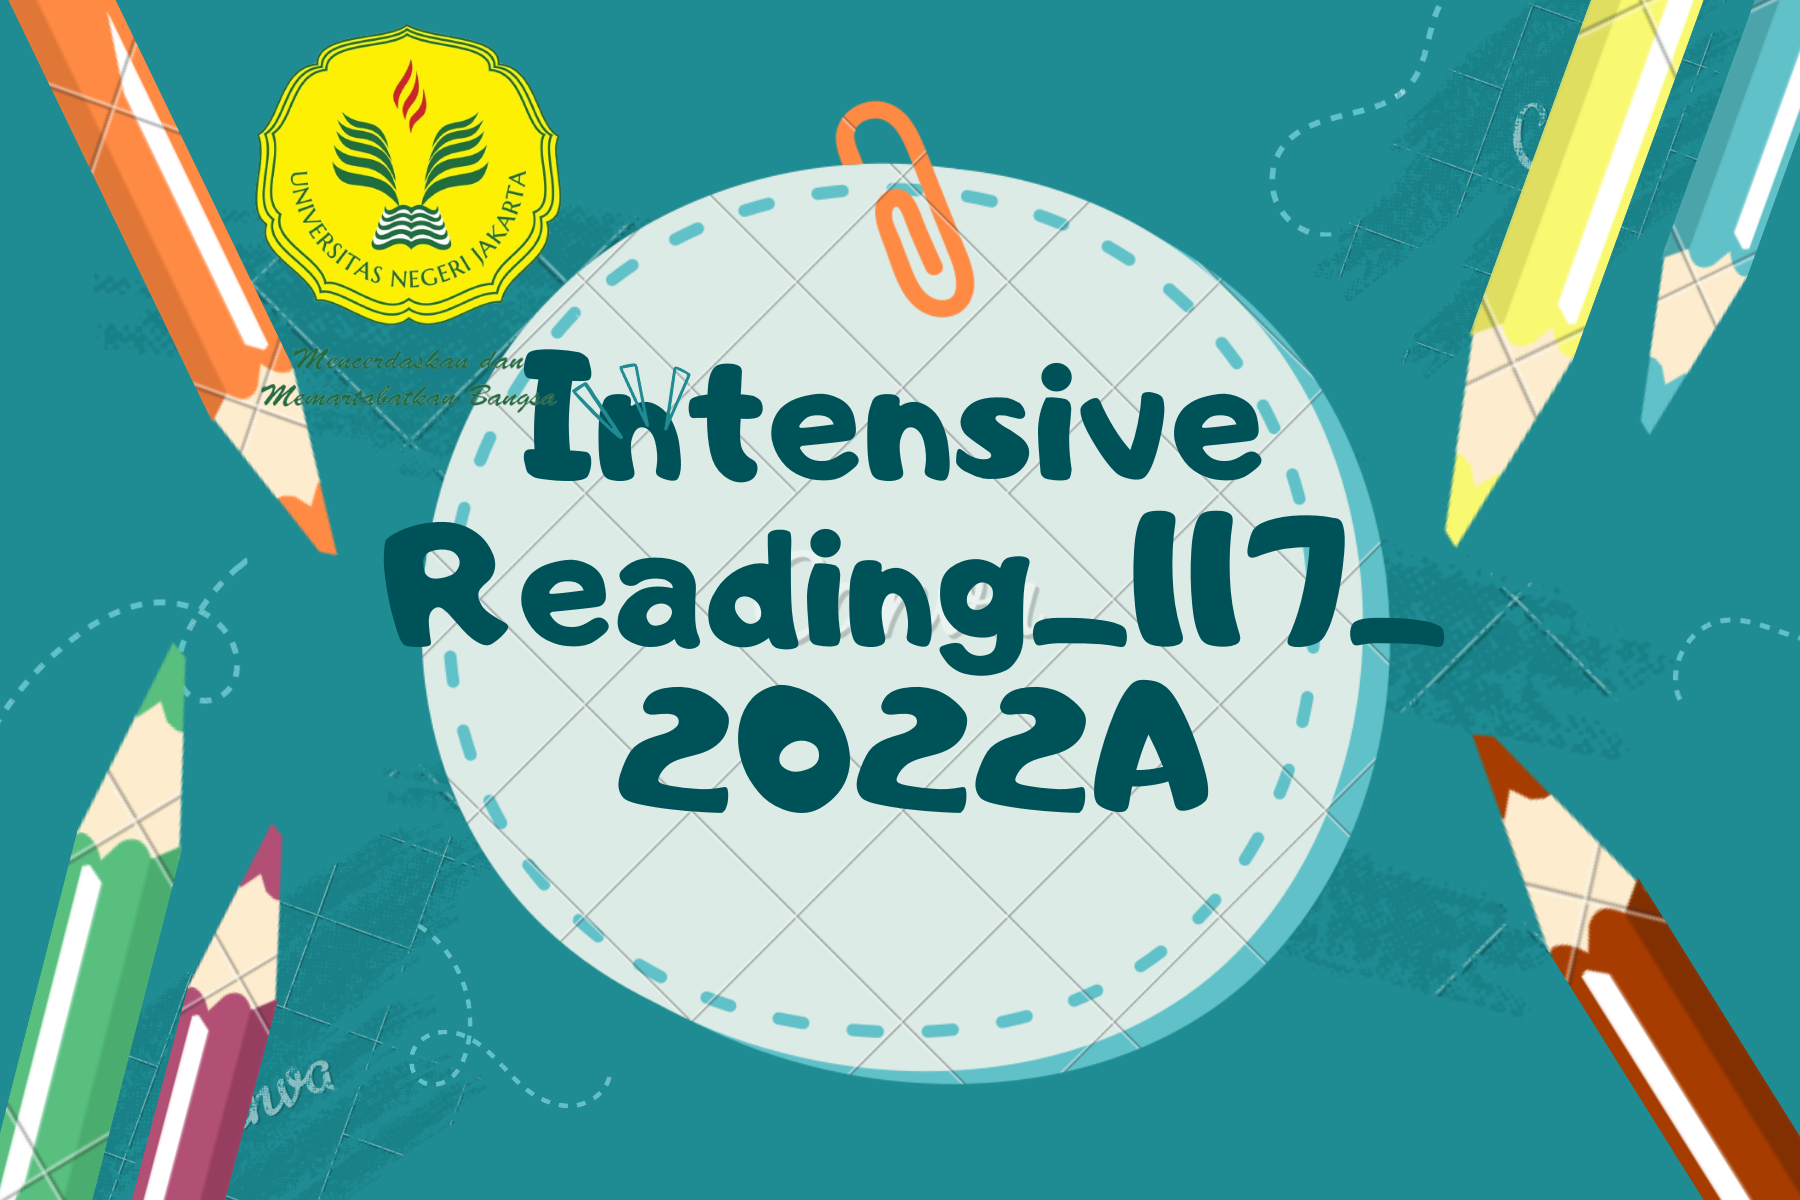 Intensive Reading_117_2022A